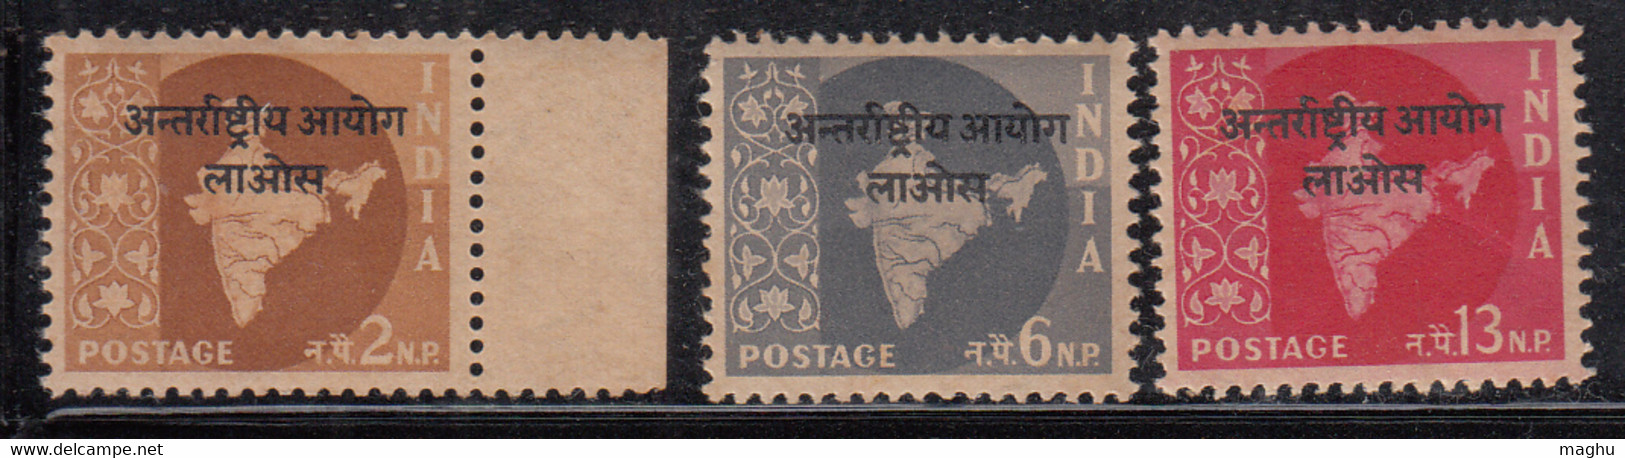 Star Watermark Series, Laos Opt. On 3v Map, India MNH 1957 - Franchise Militaire